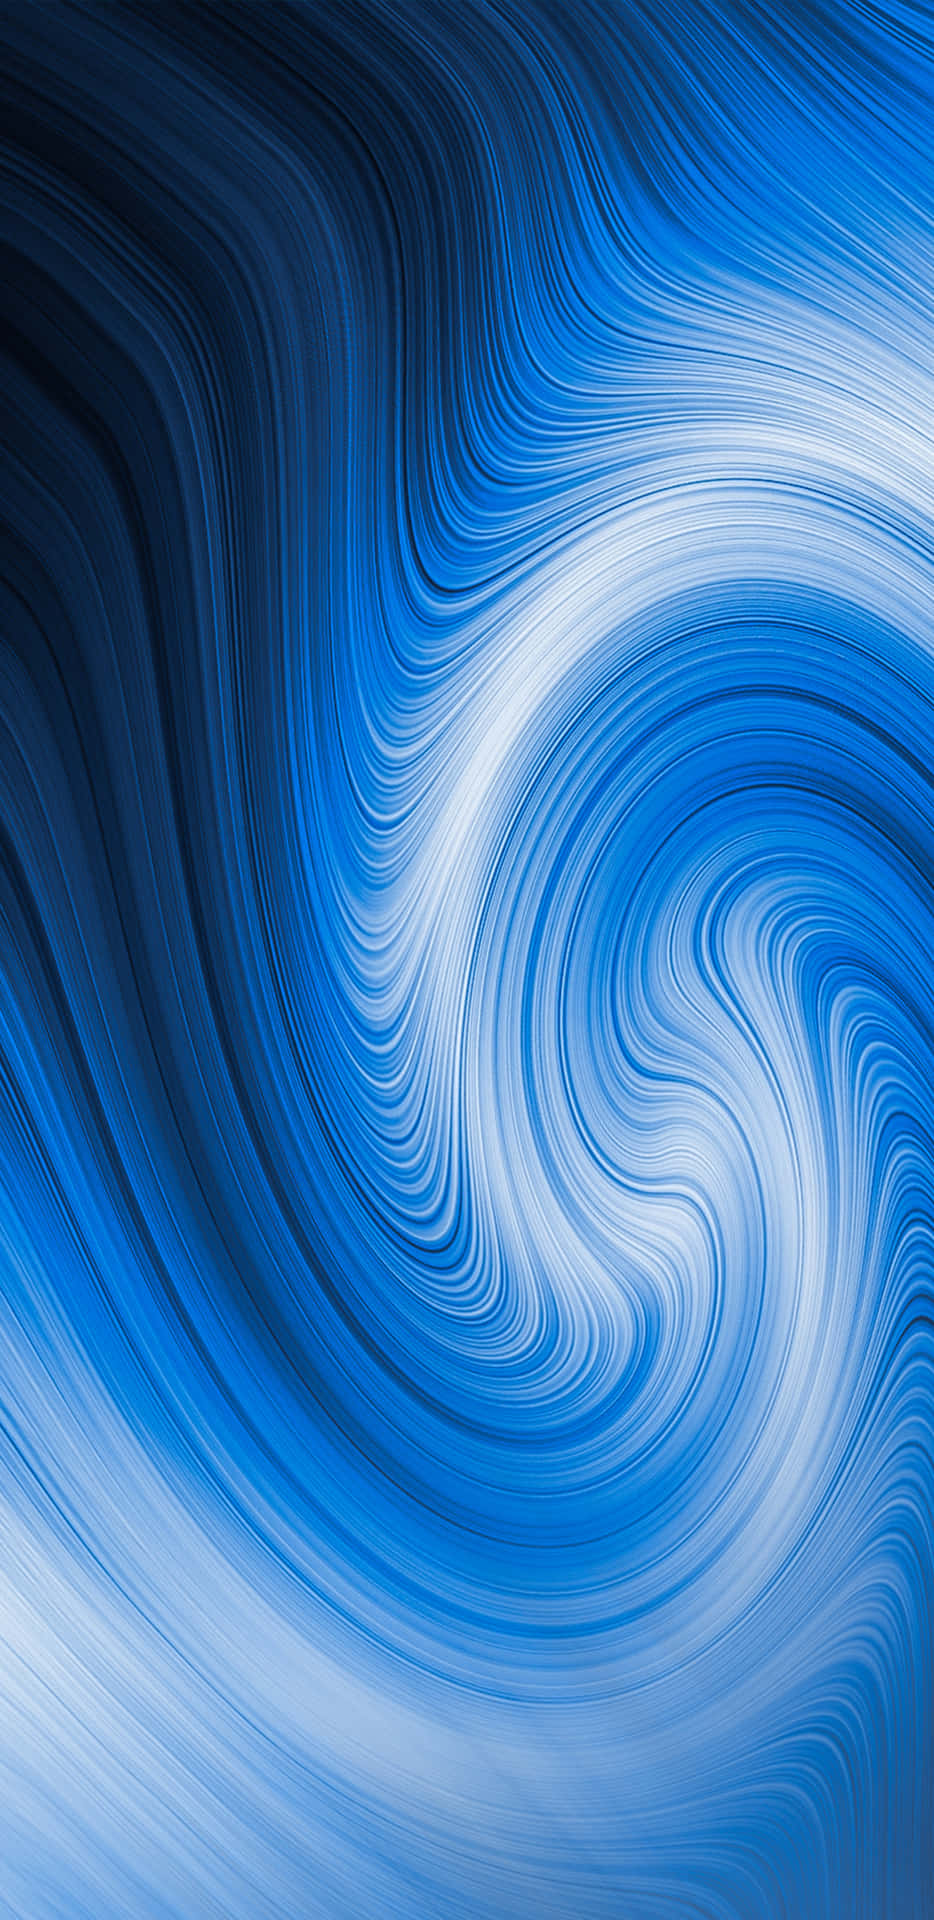 White And Blue Abstract Swirl Patterns Background